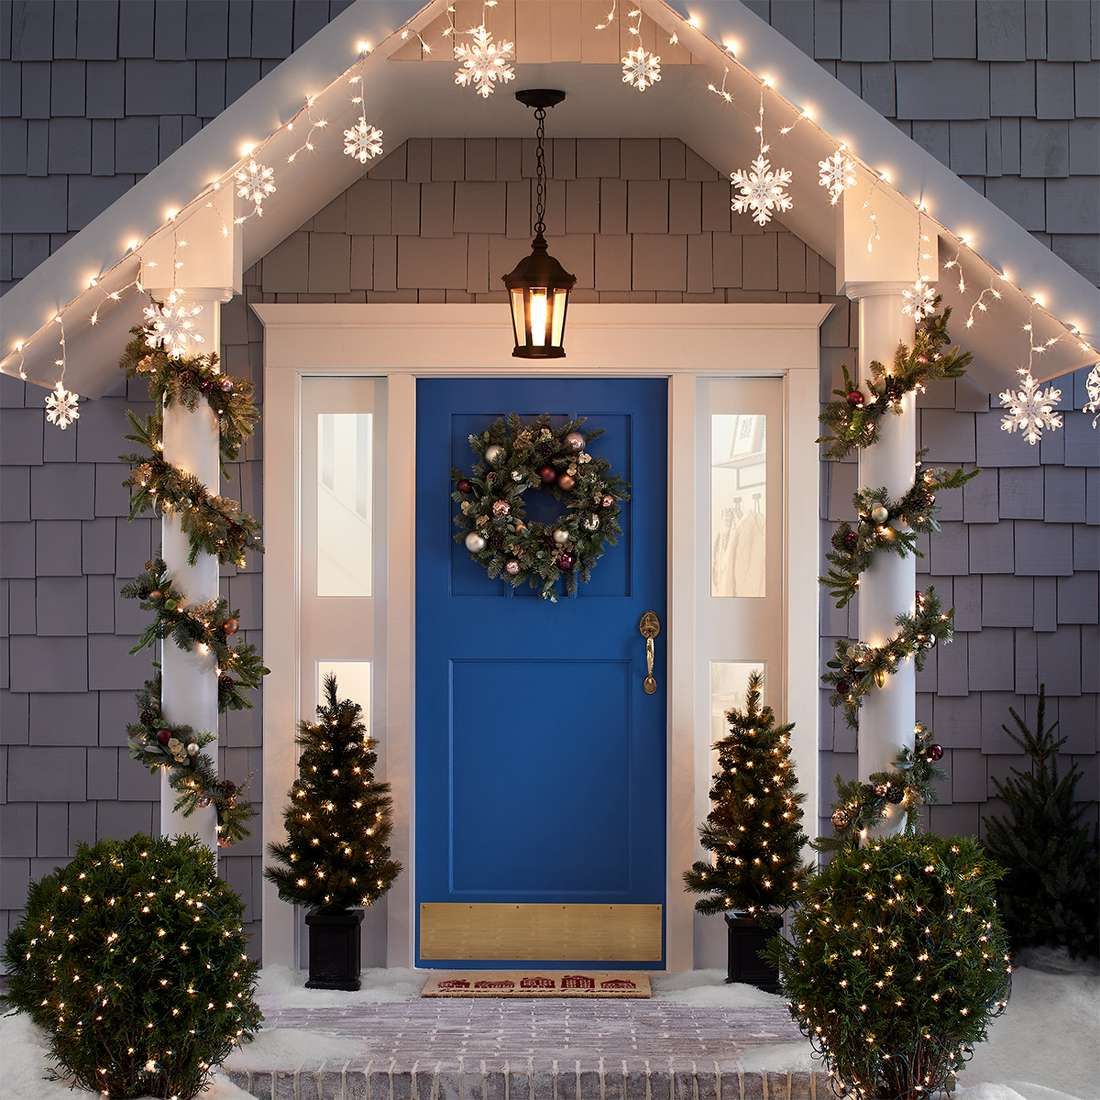 Chic Outdoor Christmas decoration 45+ Christmas Lights Decorations to Let Outdoor Area Twinkle - 5